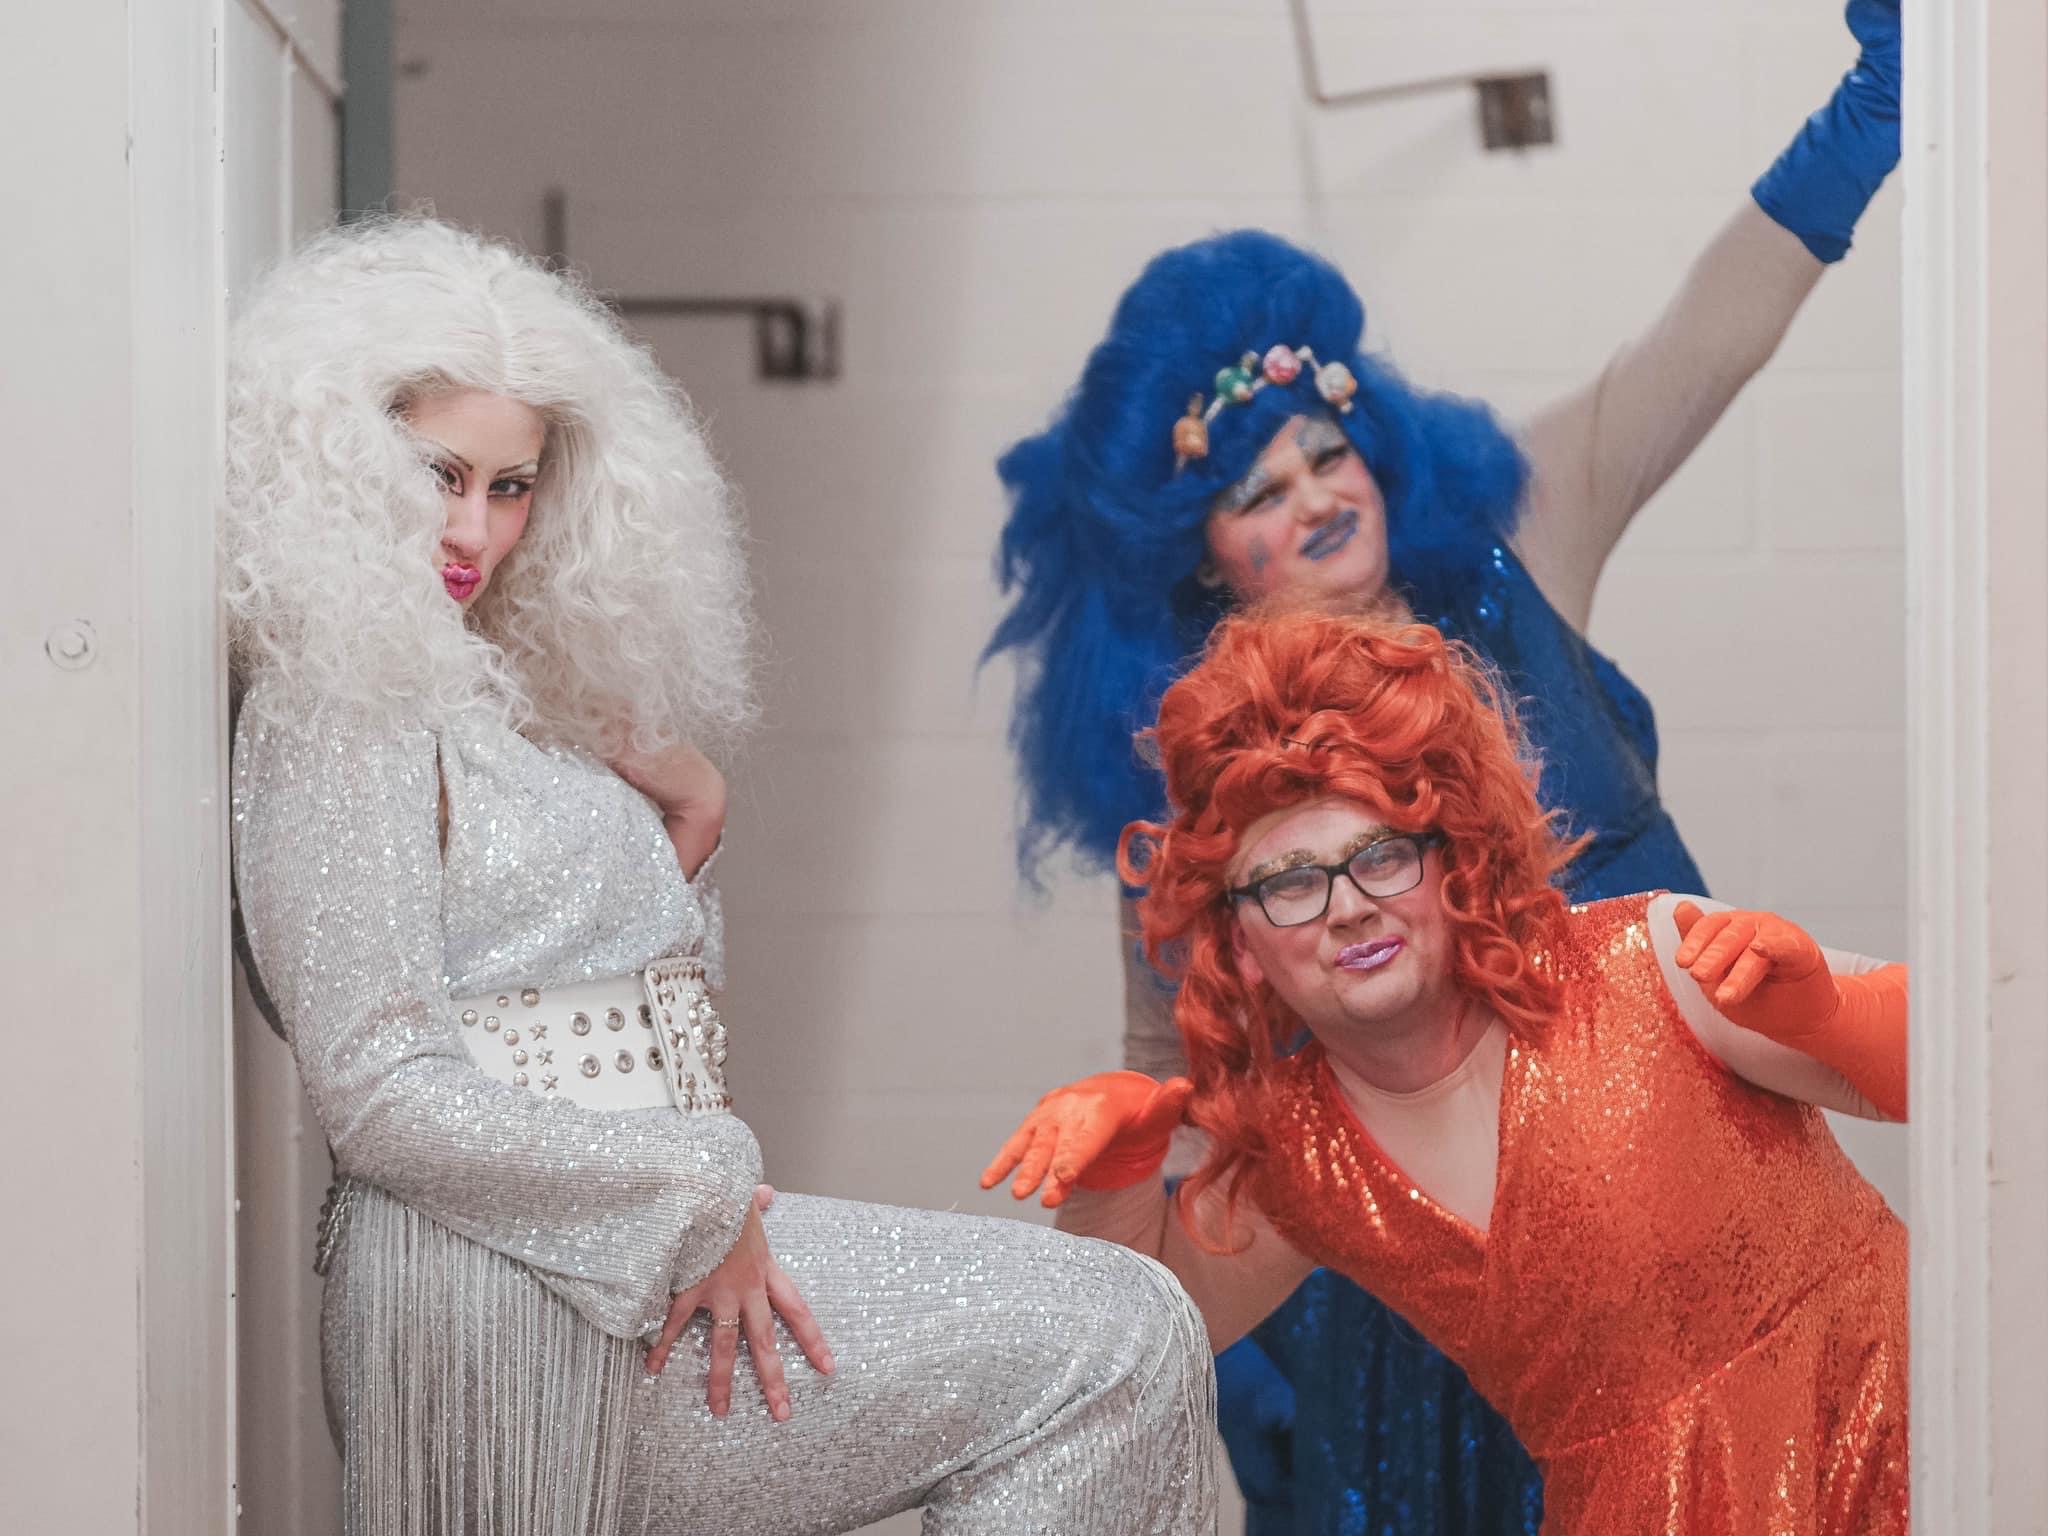 Three drag queens from the house of deviant. Cheesecake is wearing an orange sequin gown and wig, flossy is wearing a blue sequin gown and wig, and Cherry is in a silver sequin jumpsuit and wig. They are posing for the camera backstage.